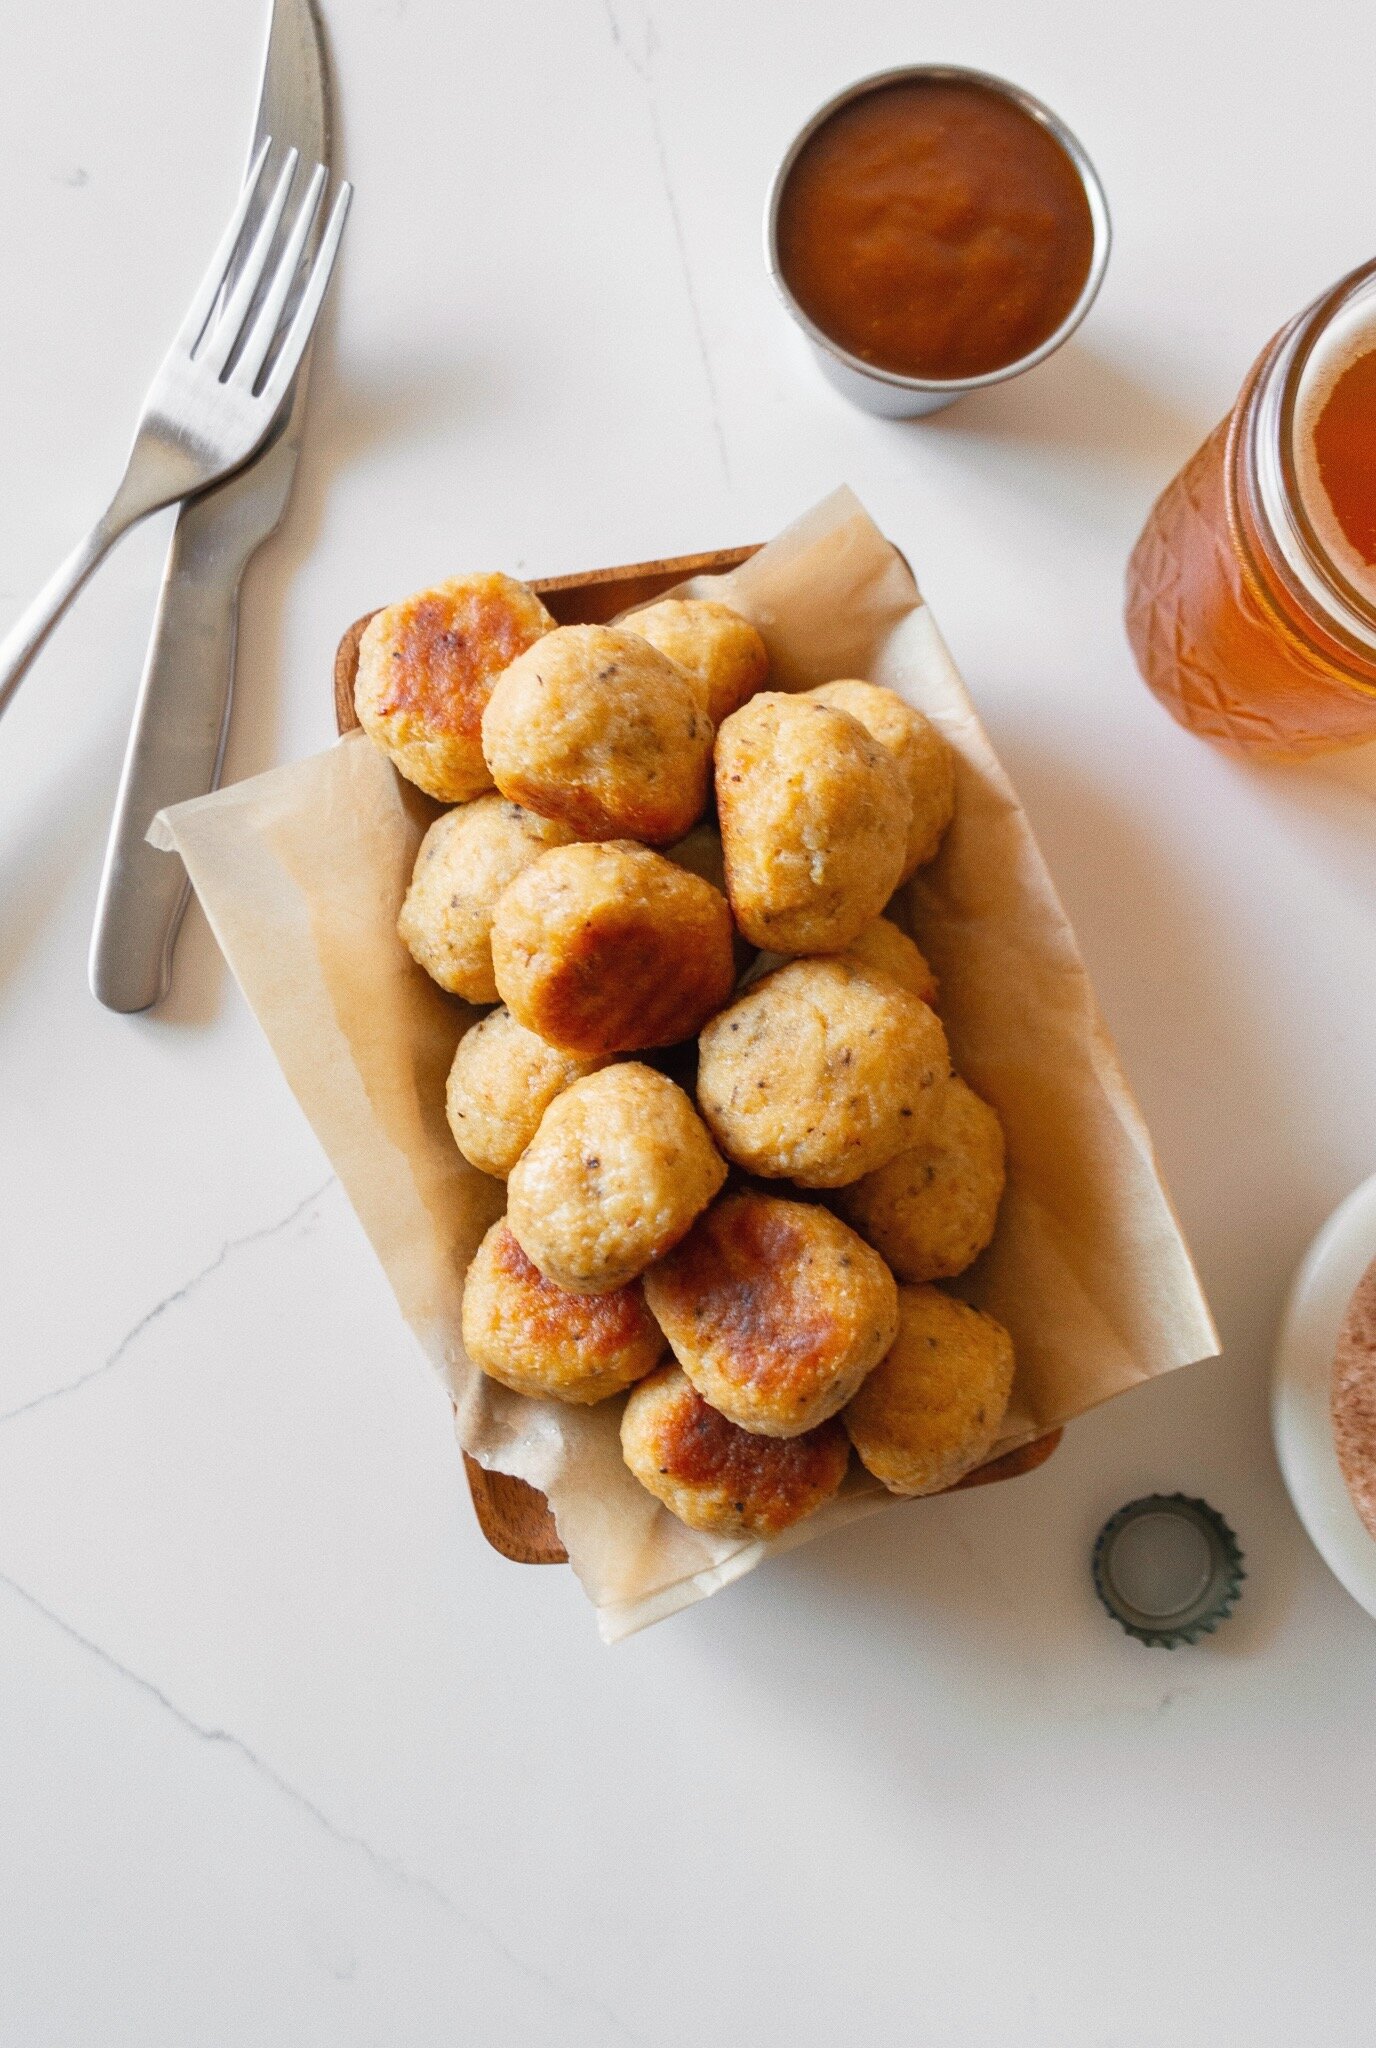 Plated Juicy Oven-Baked Chicken Meatballs with a beer and dipping sauce